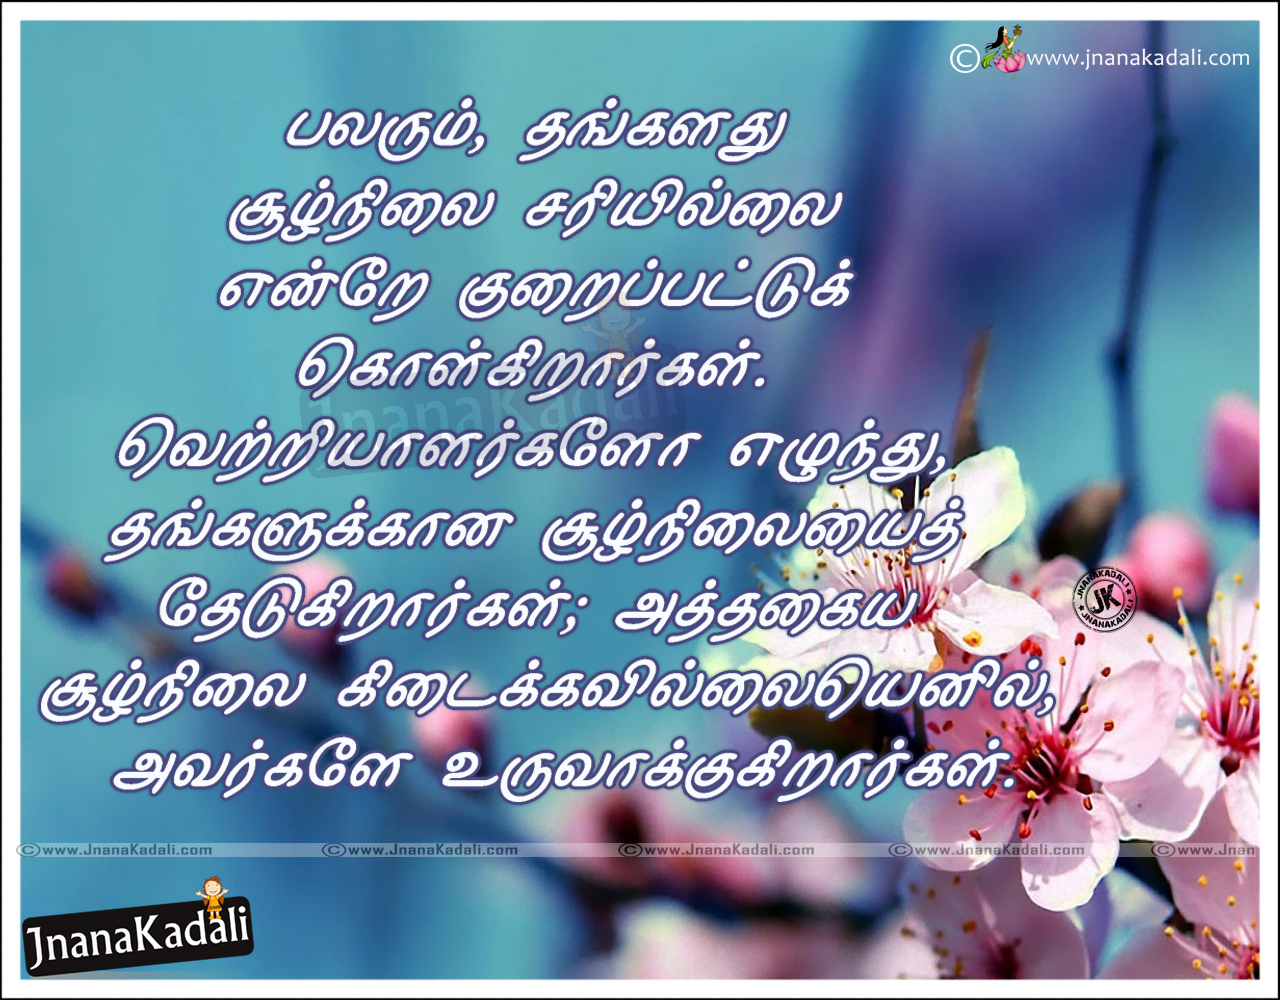 Here is a Nice Tamil Beautiful Life Thoughts with Nice Tamil Inspiring Messages online